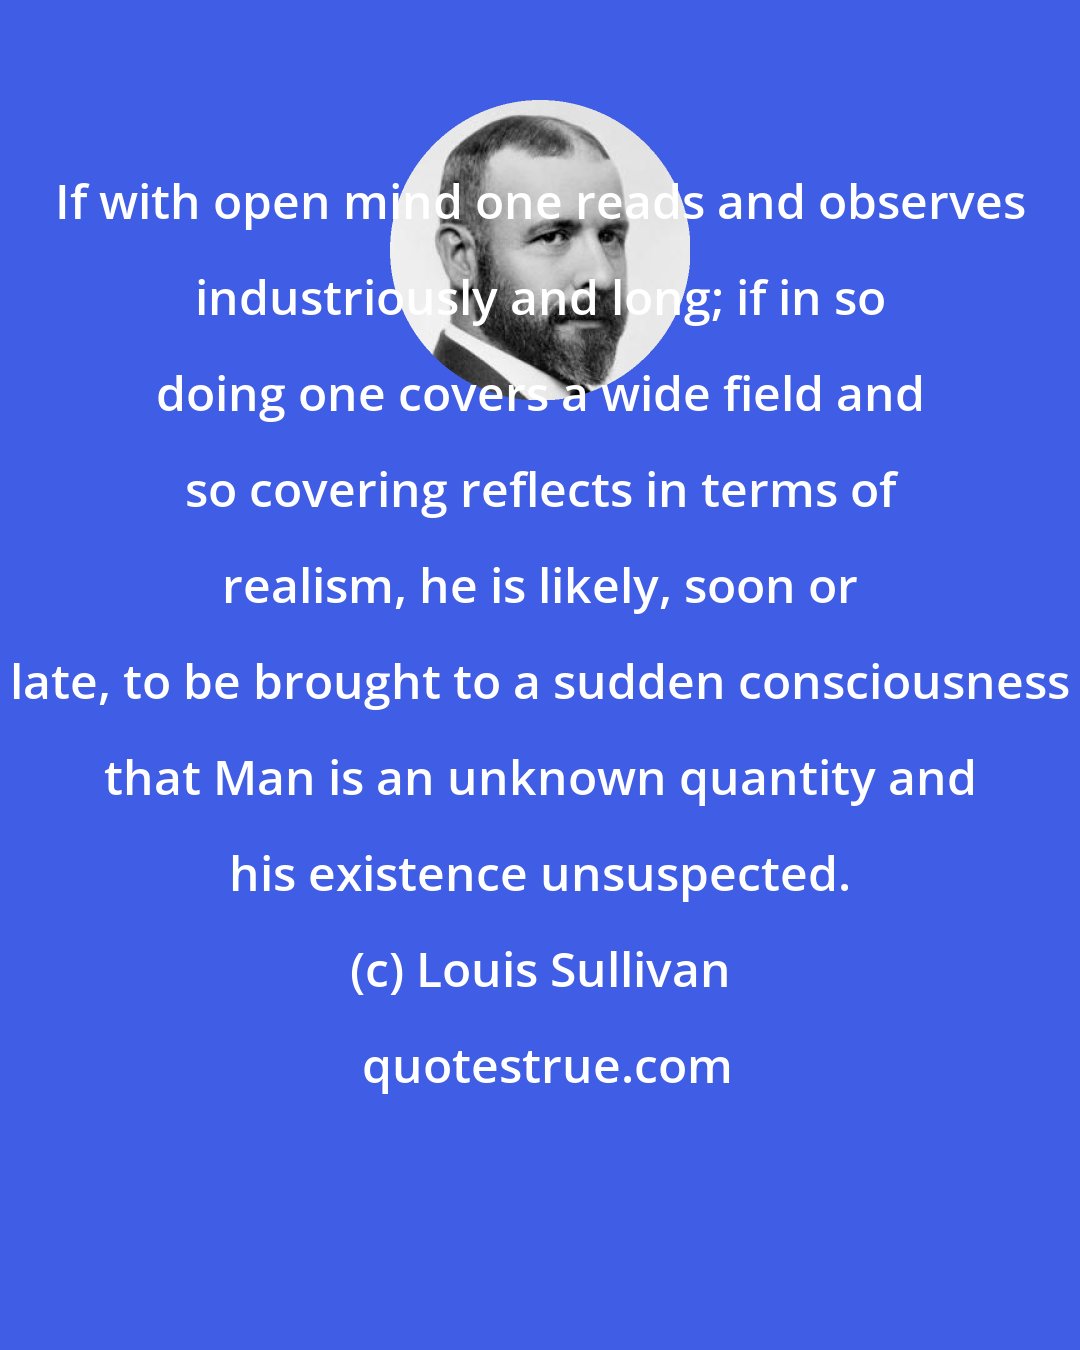 Louis Sullivan: If with open mind one reads and observes industriously and long; if in so doing one covers a wide field and so covering reflects in terms of realism, he is likely, soon or late, to be brought to a sudden consciousness that Man is an unknown quantity and his existence unsuspected.